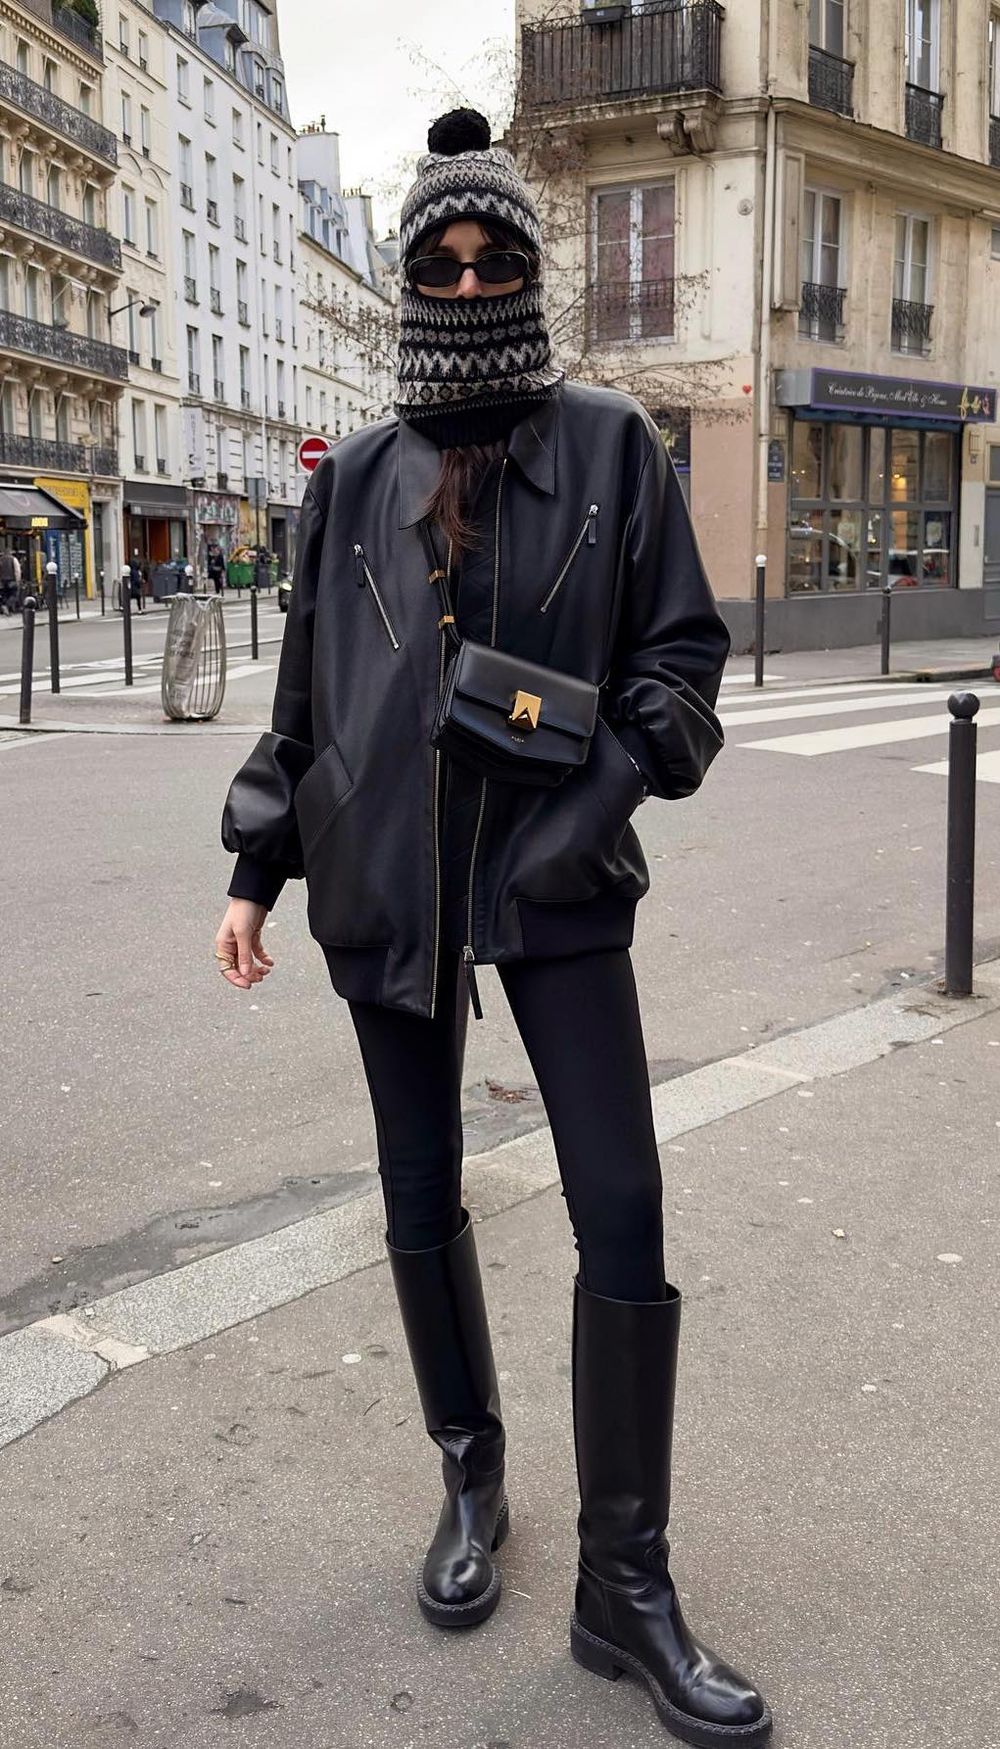 French Winter style black boots leiasfez